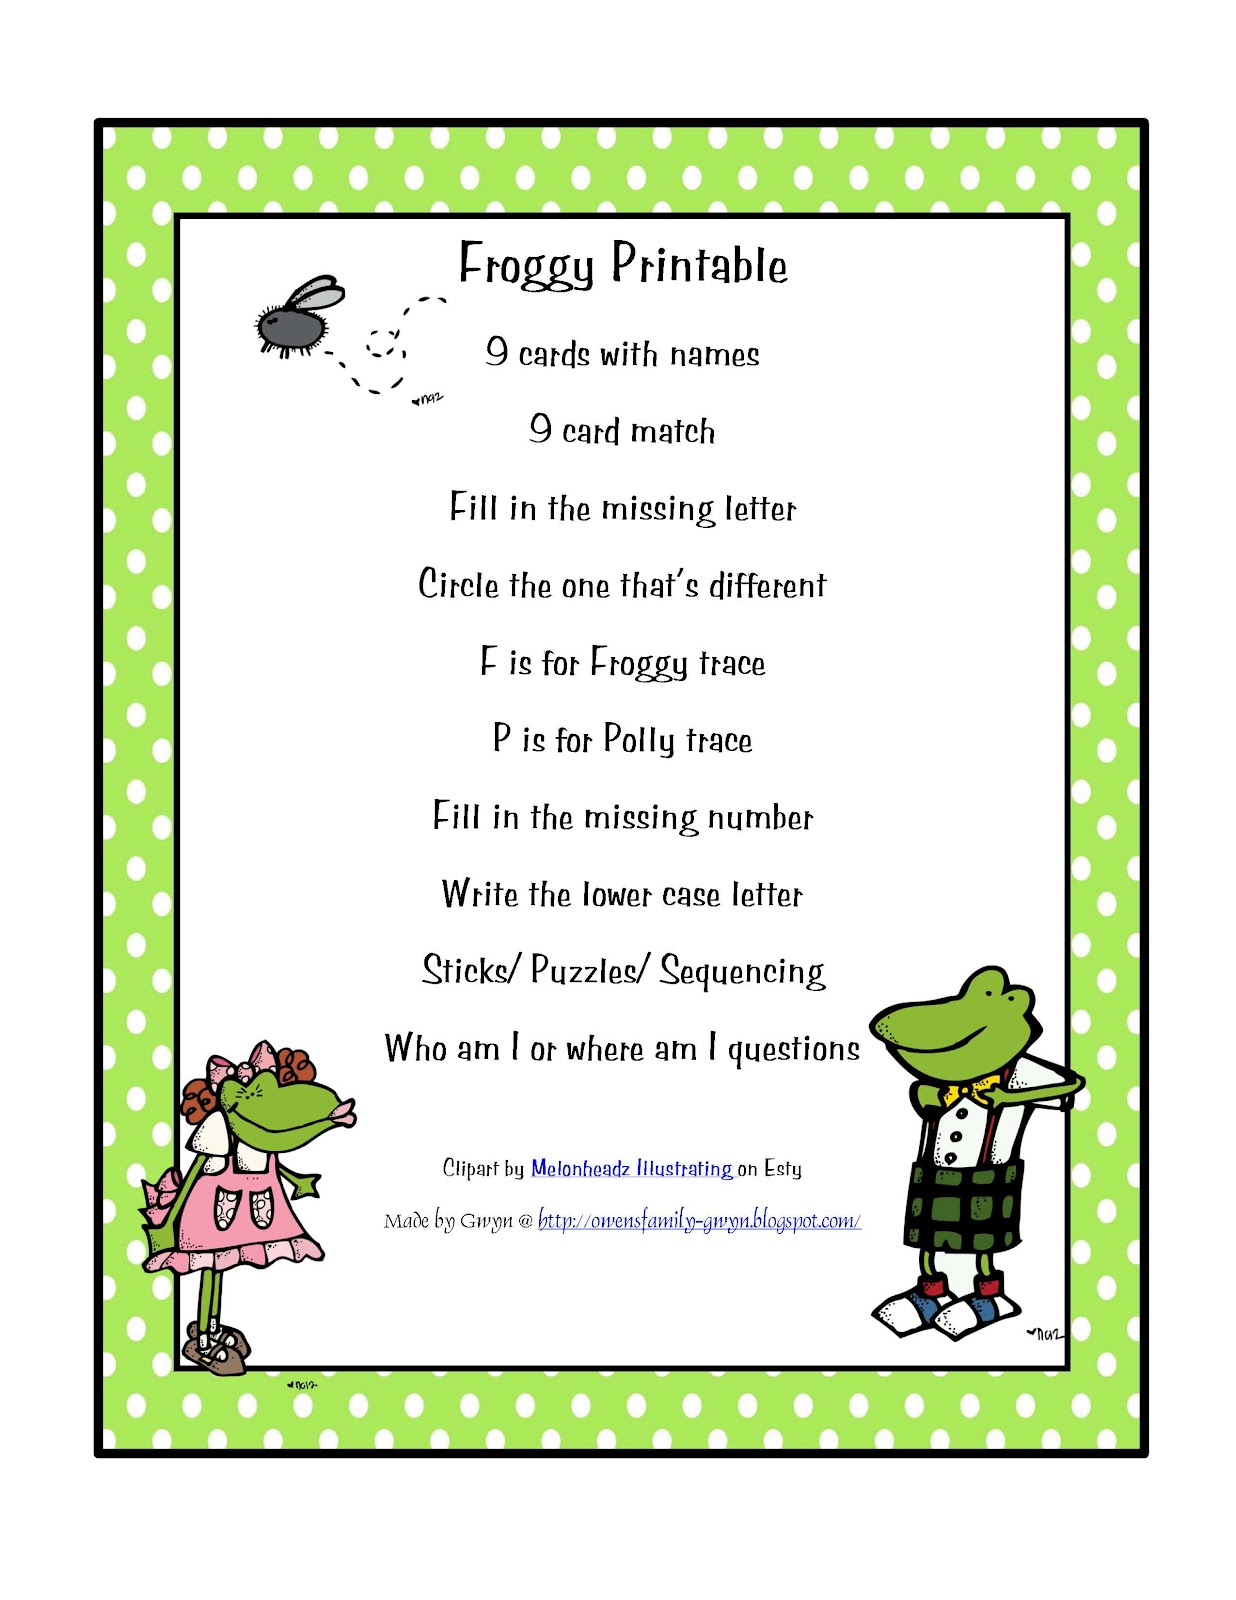 barbie-printables-my-froggy-stuff-17-best-images-about-my-froggy